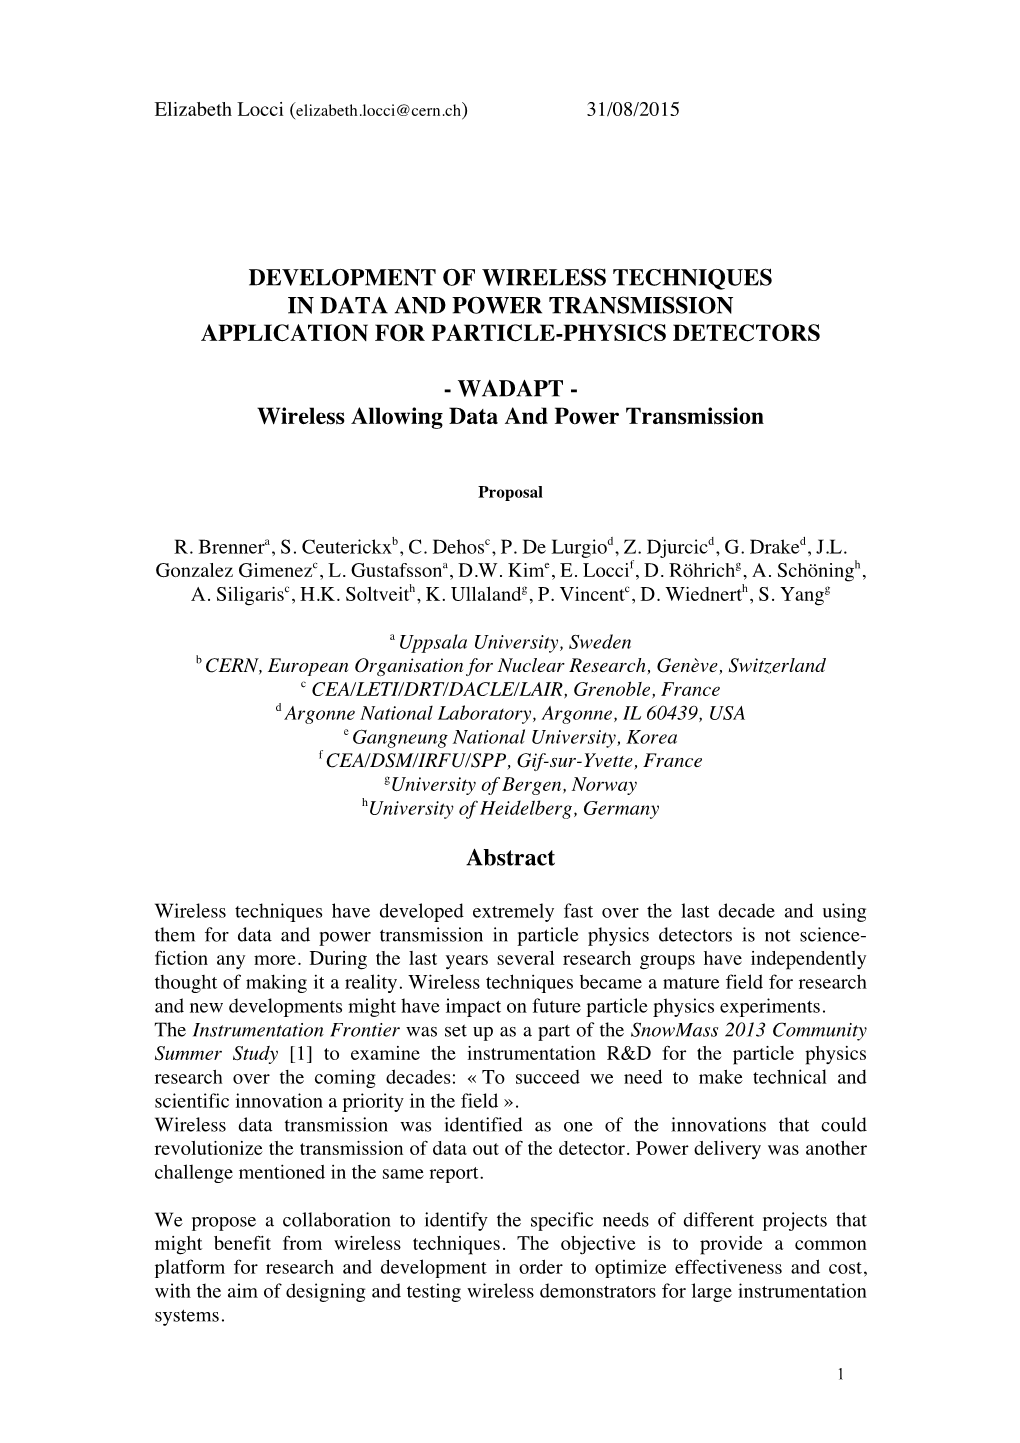 Development of Wireless Techniques in Data and Power Transmission Application for Particle-Physics Detectors